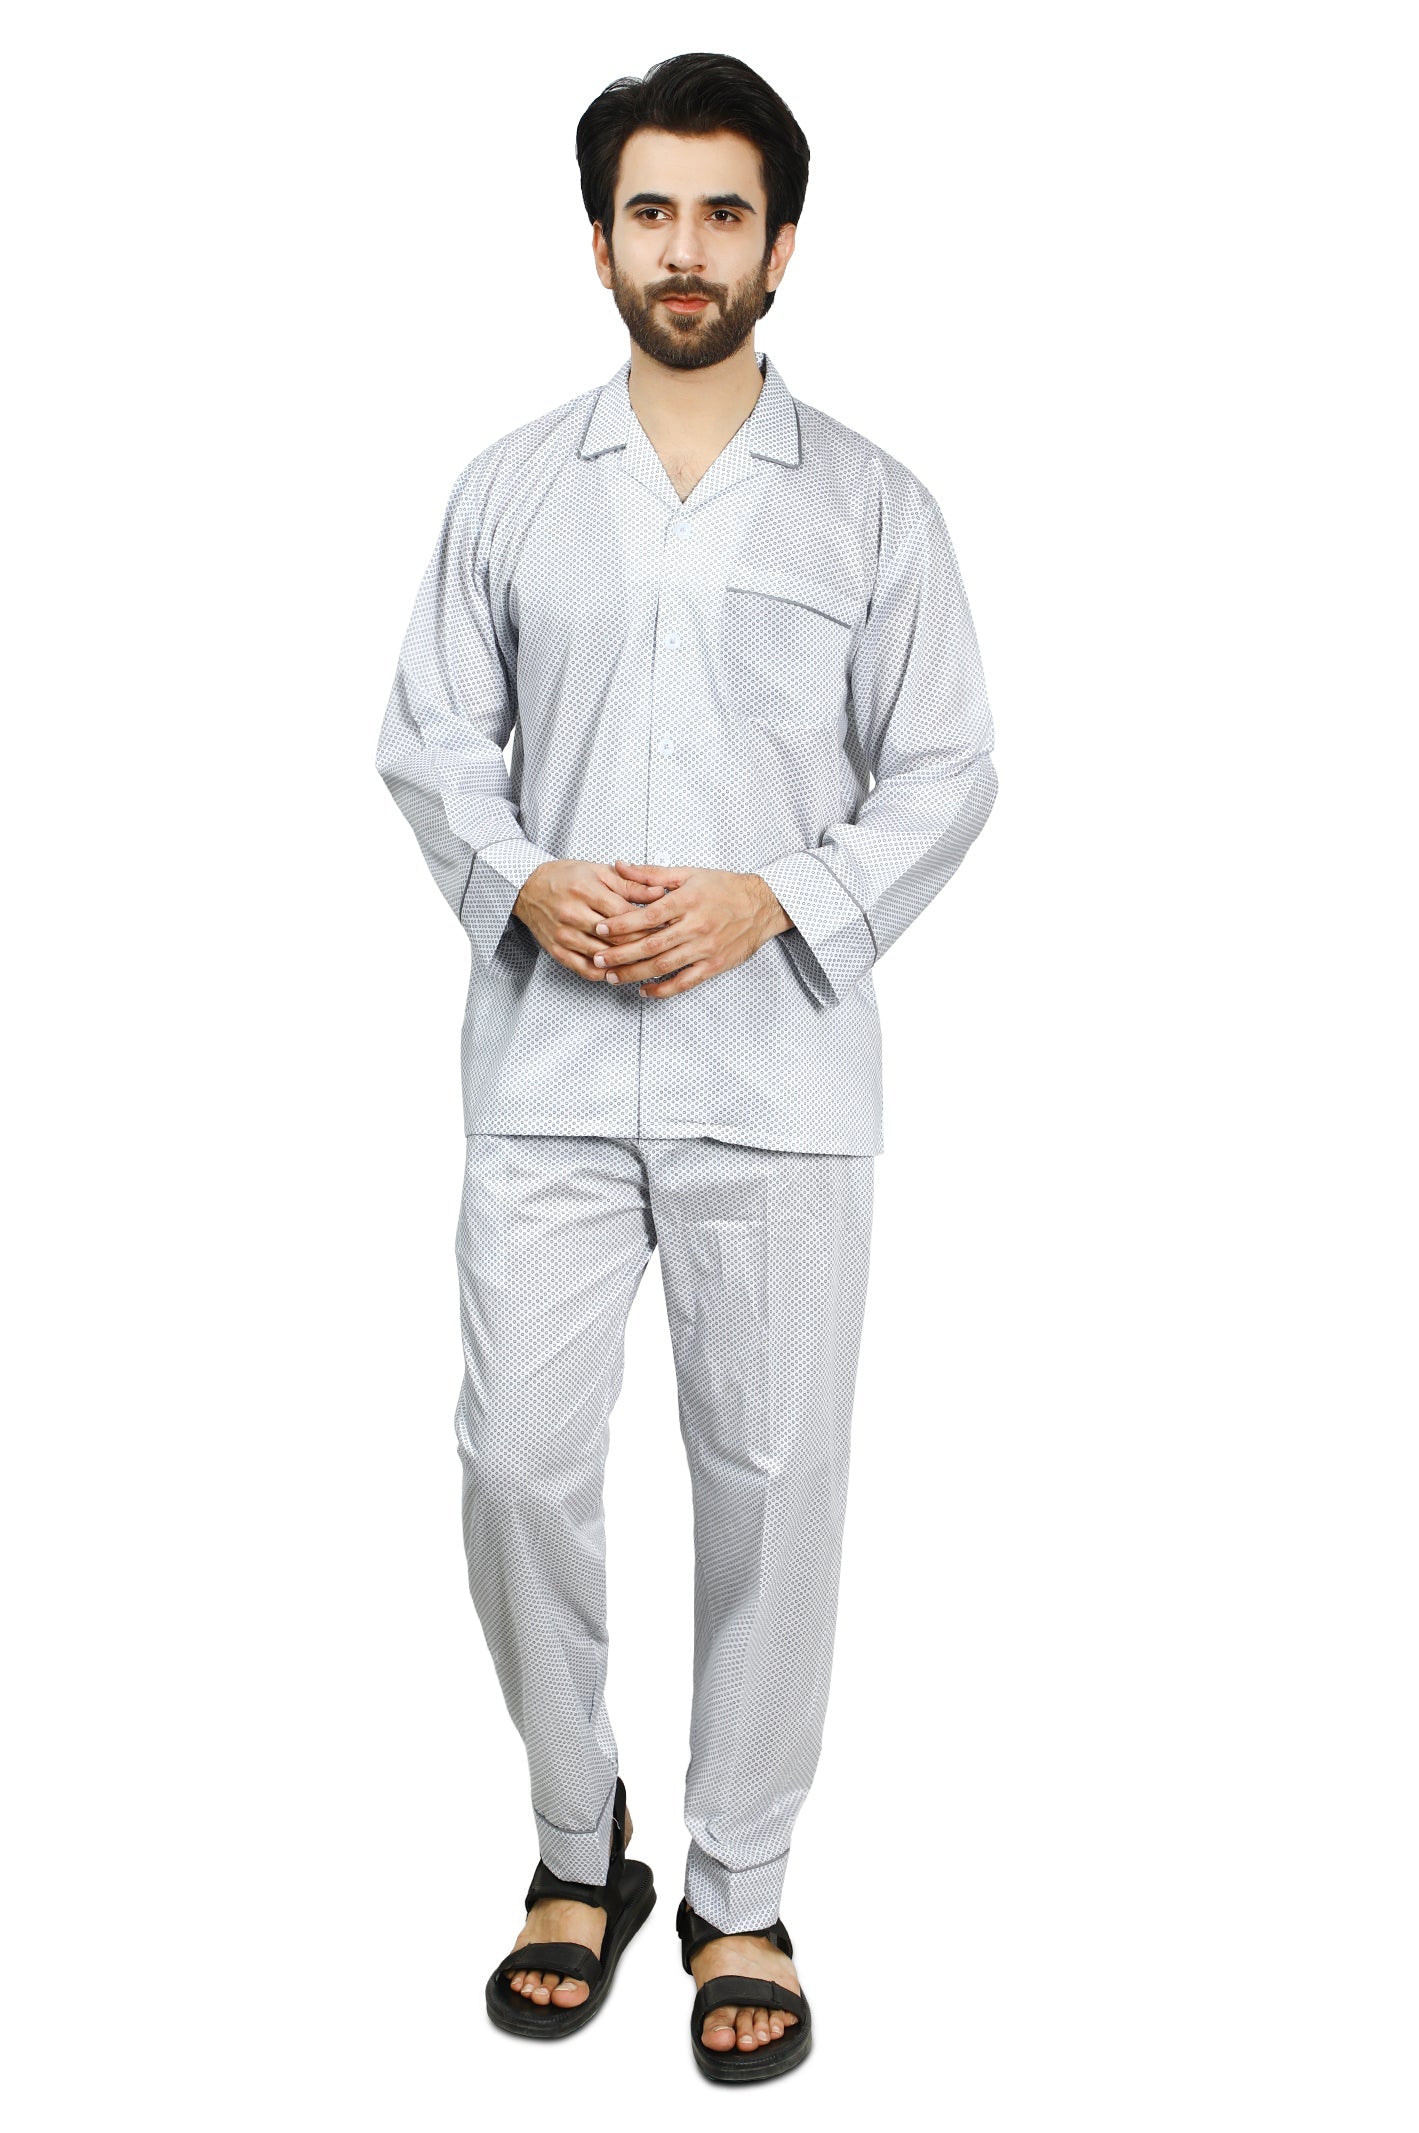 Diner's Night Suit for Men SKU: FNS009-WHITE - Diners